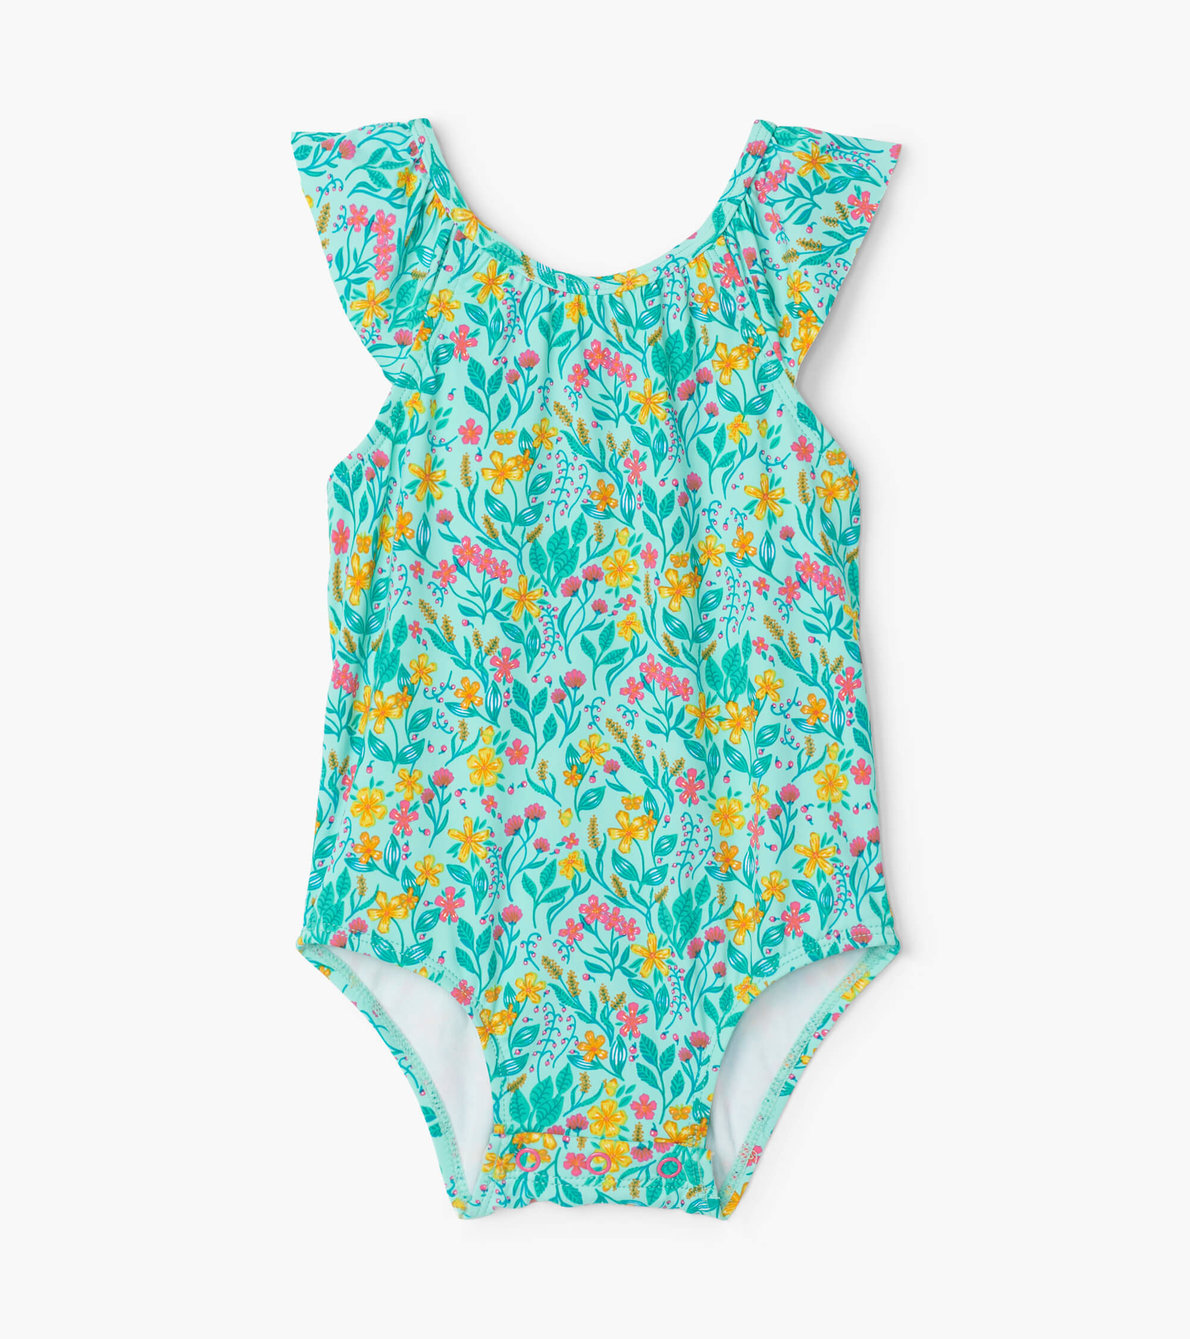 View larger image of Summer Garden Baby Ruffle Swimsuit